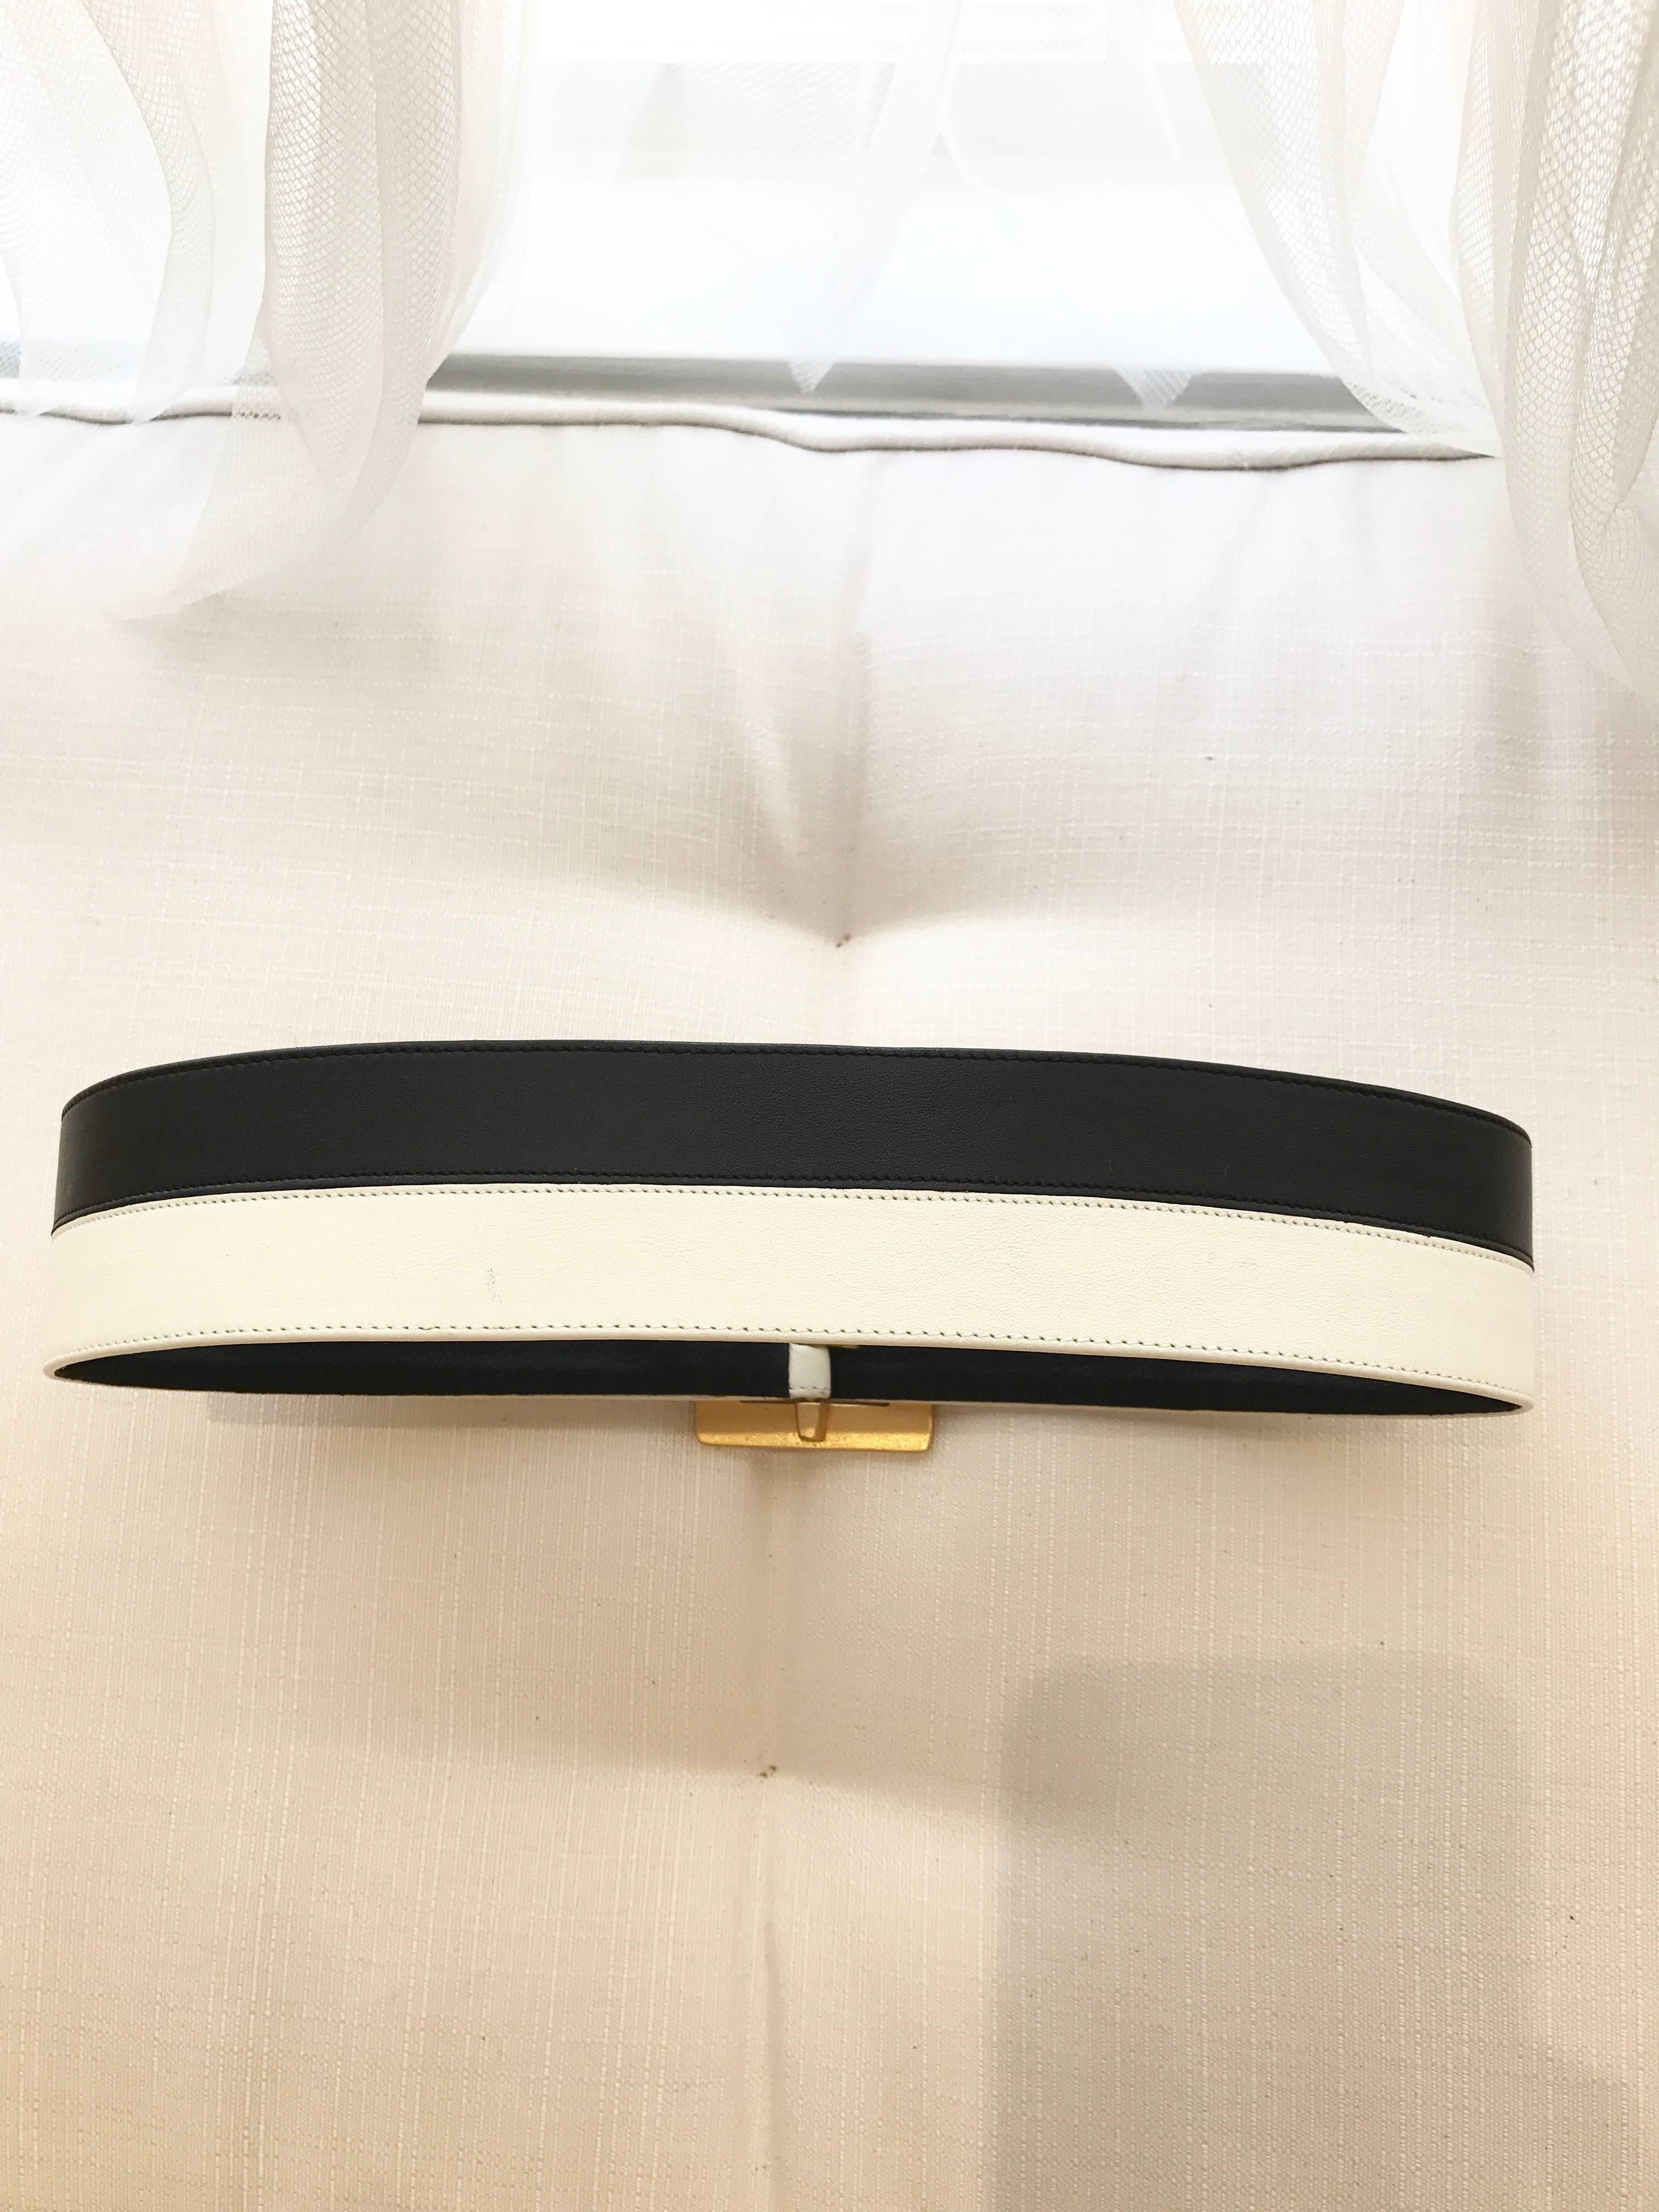 Women's 1980s CHANEL Black and White Leather Belt